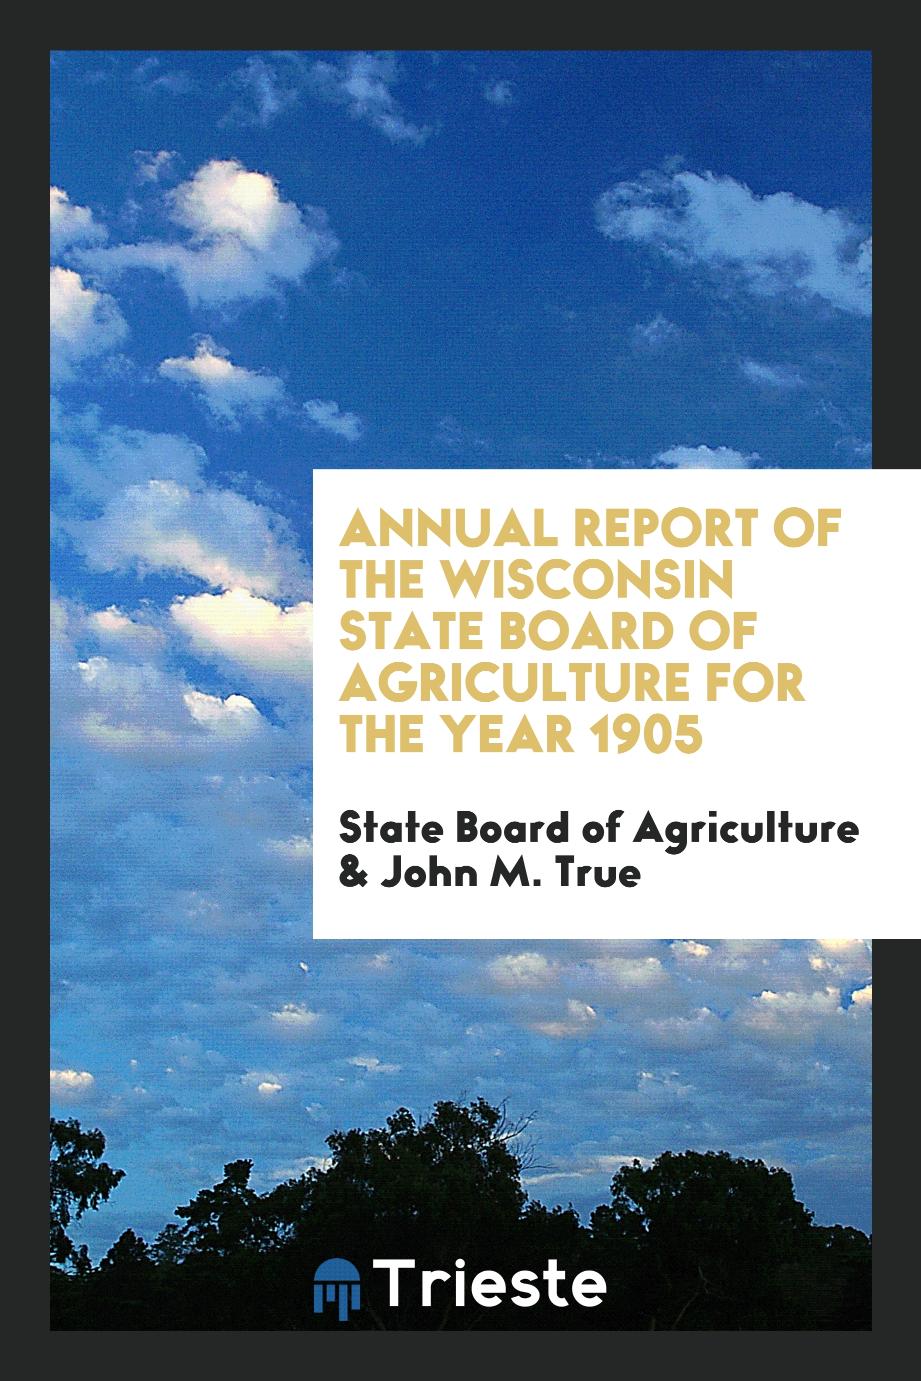 Annual Report of the Wisconsin State Board of Agriculture for the Year 1905